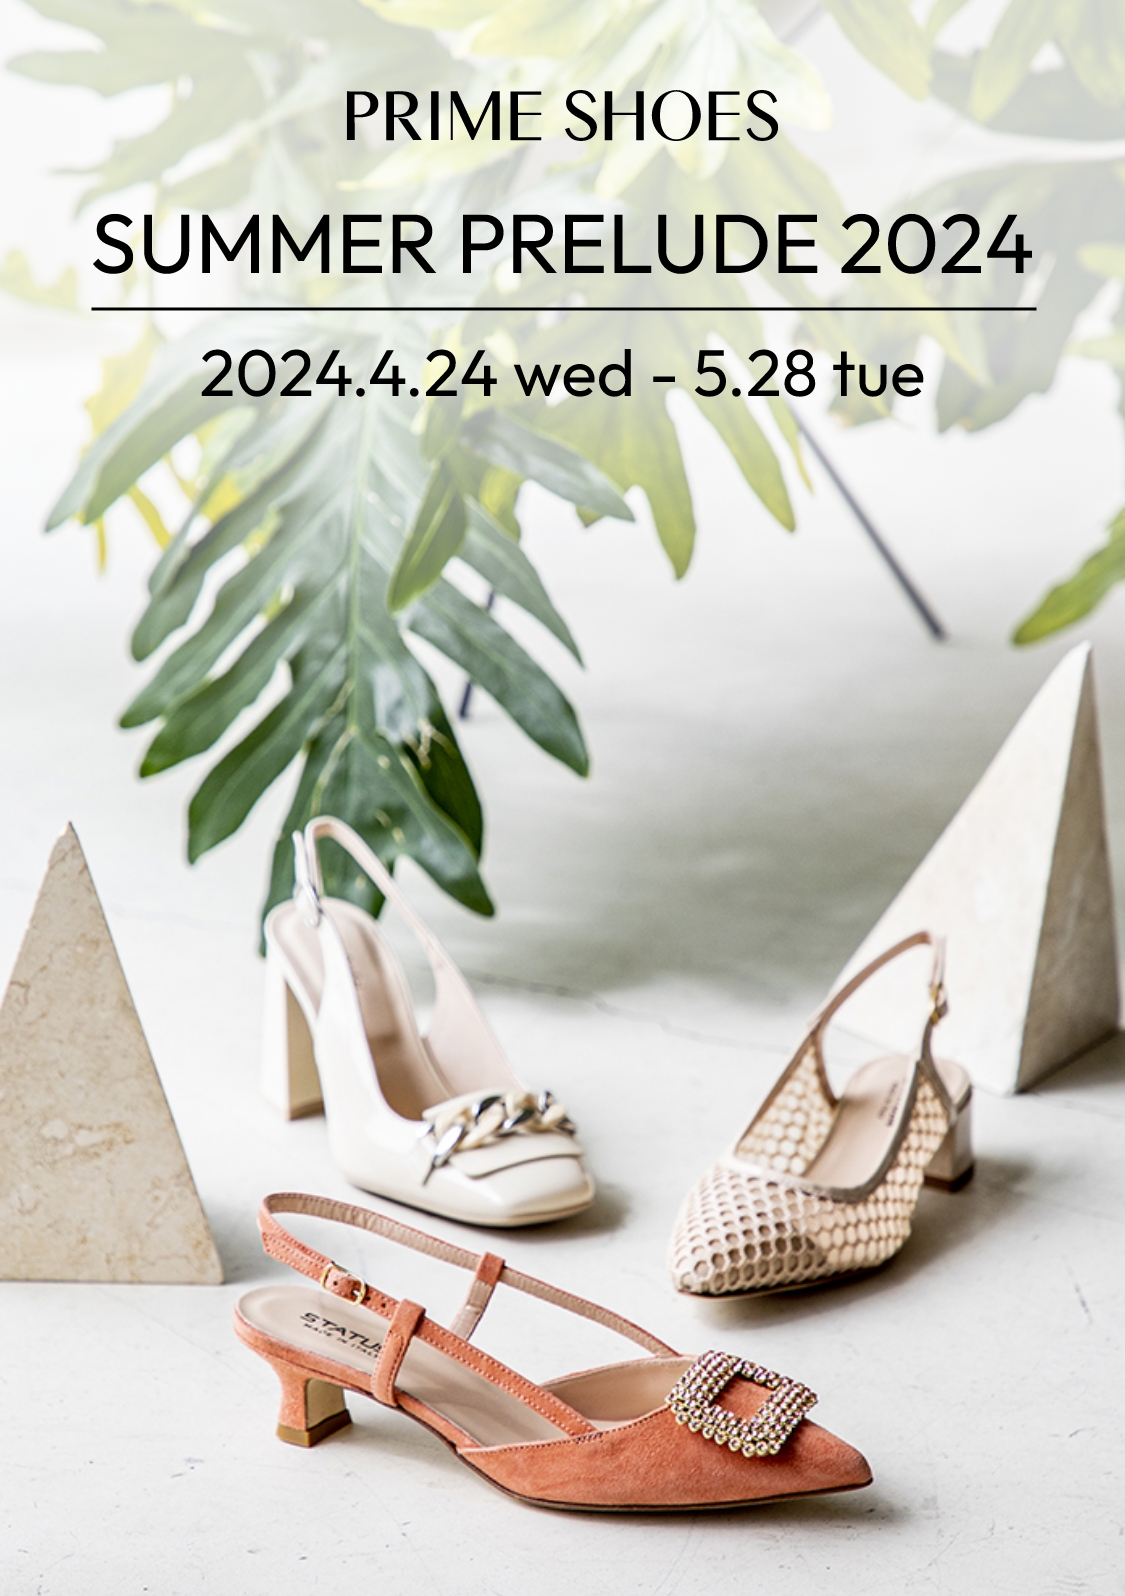 PRIME SHOES ／ SUMMER PRELUDE 2024